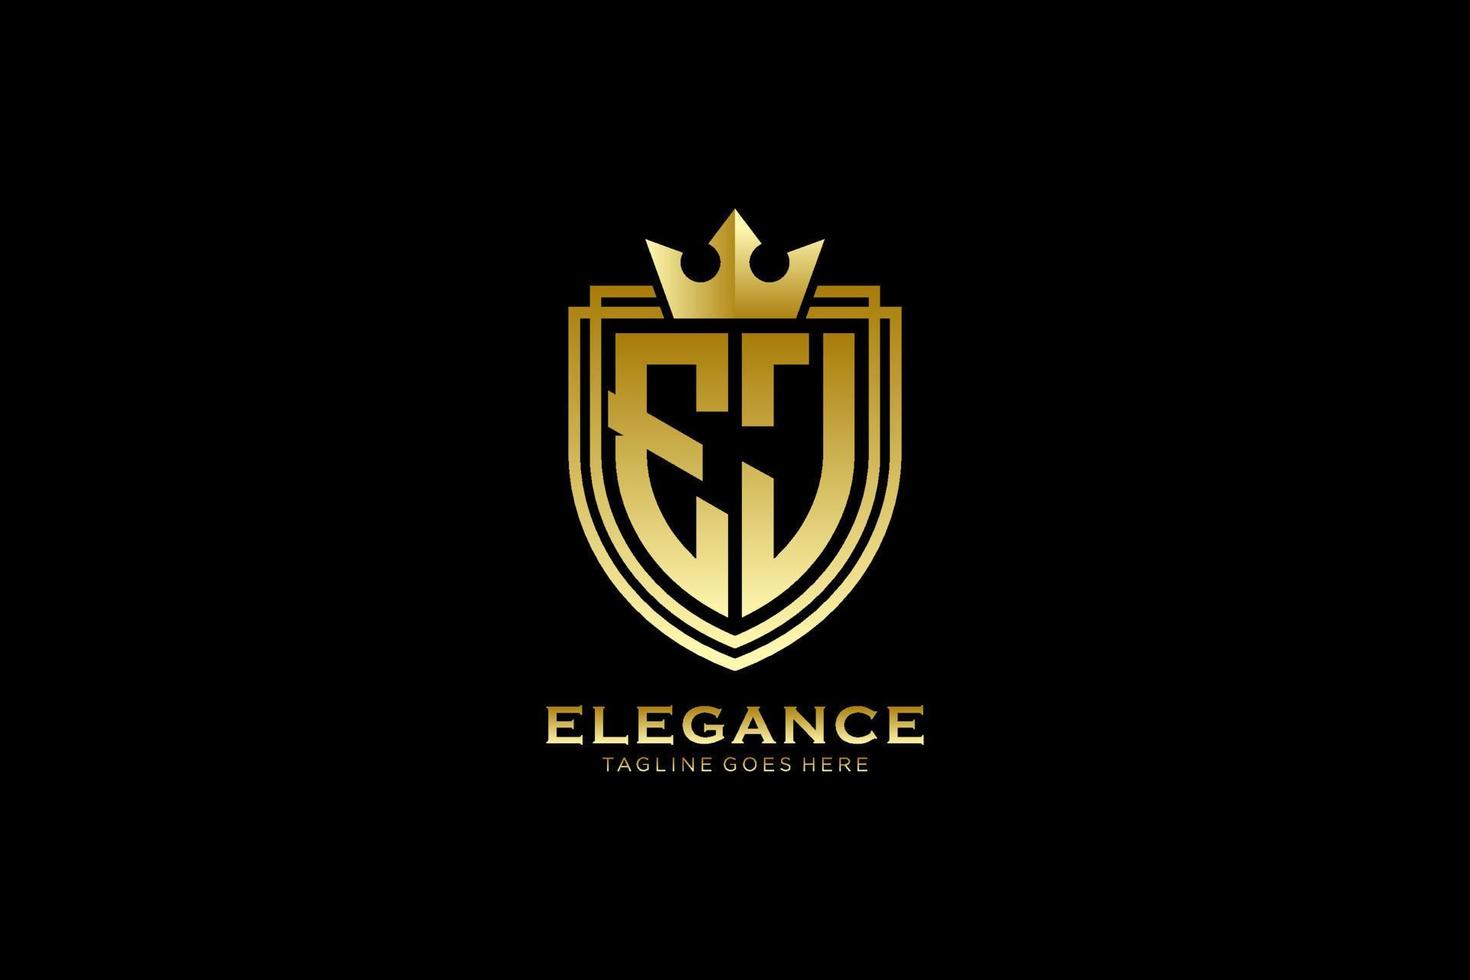 initial EJ elegant luxury monogram logo or badge template with scrolls and royal crown - perfect for luxurious branding projects vector